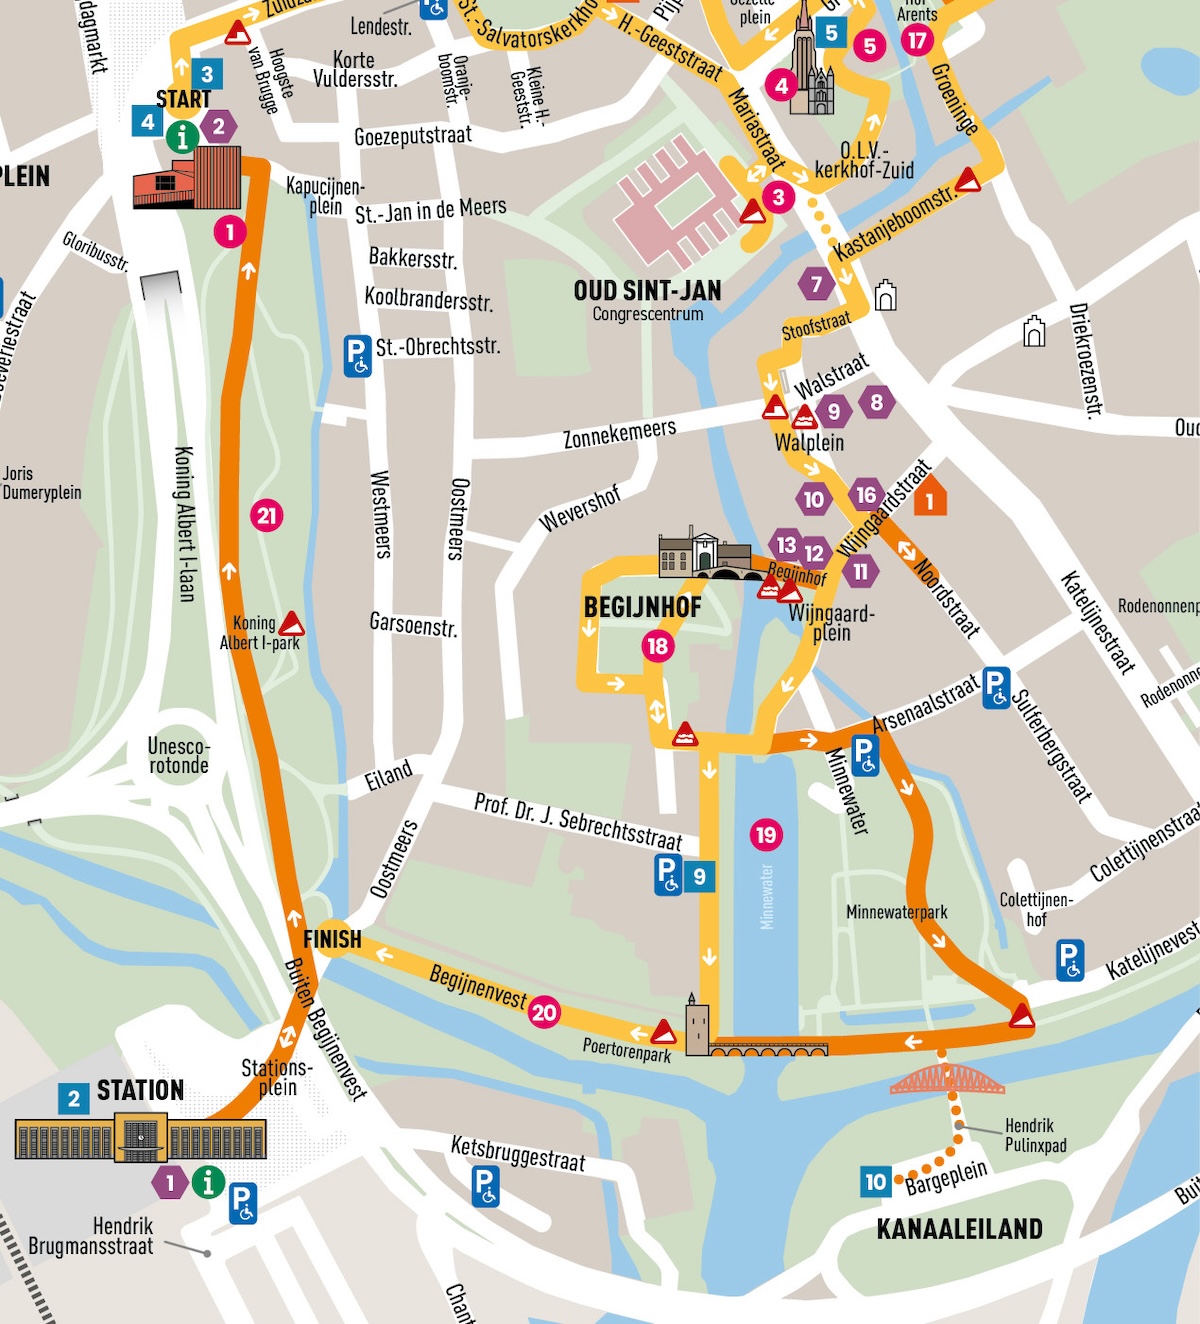 Detail map 3 with a section of the walking route. The map is bordered as follows: Sint-Salvatorskerkhof in the north, Katelijnestraat in the east, train station and Kanaaleiland in the south, King Albert I Park in the west